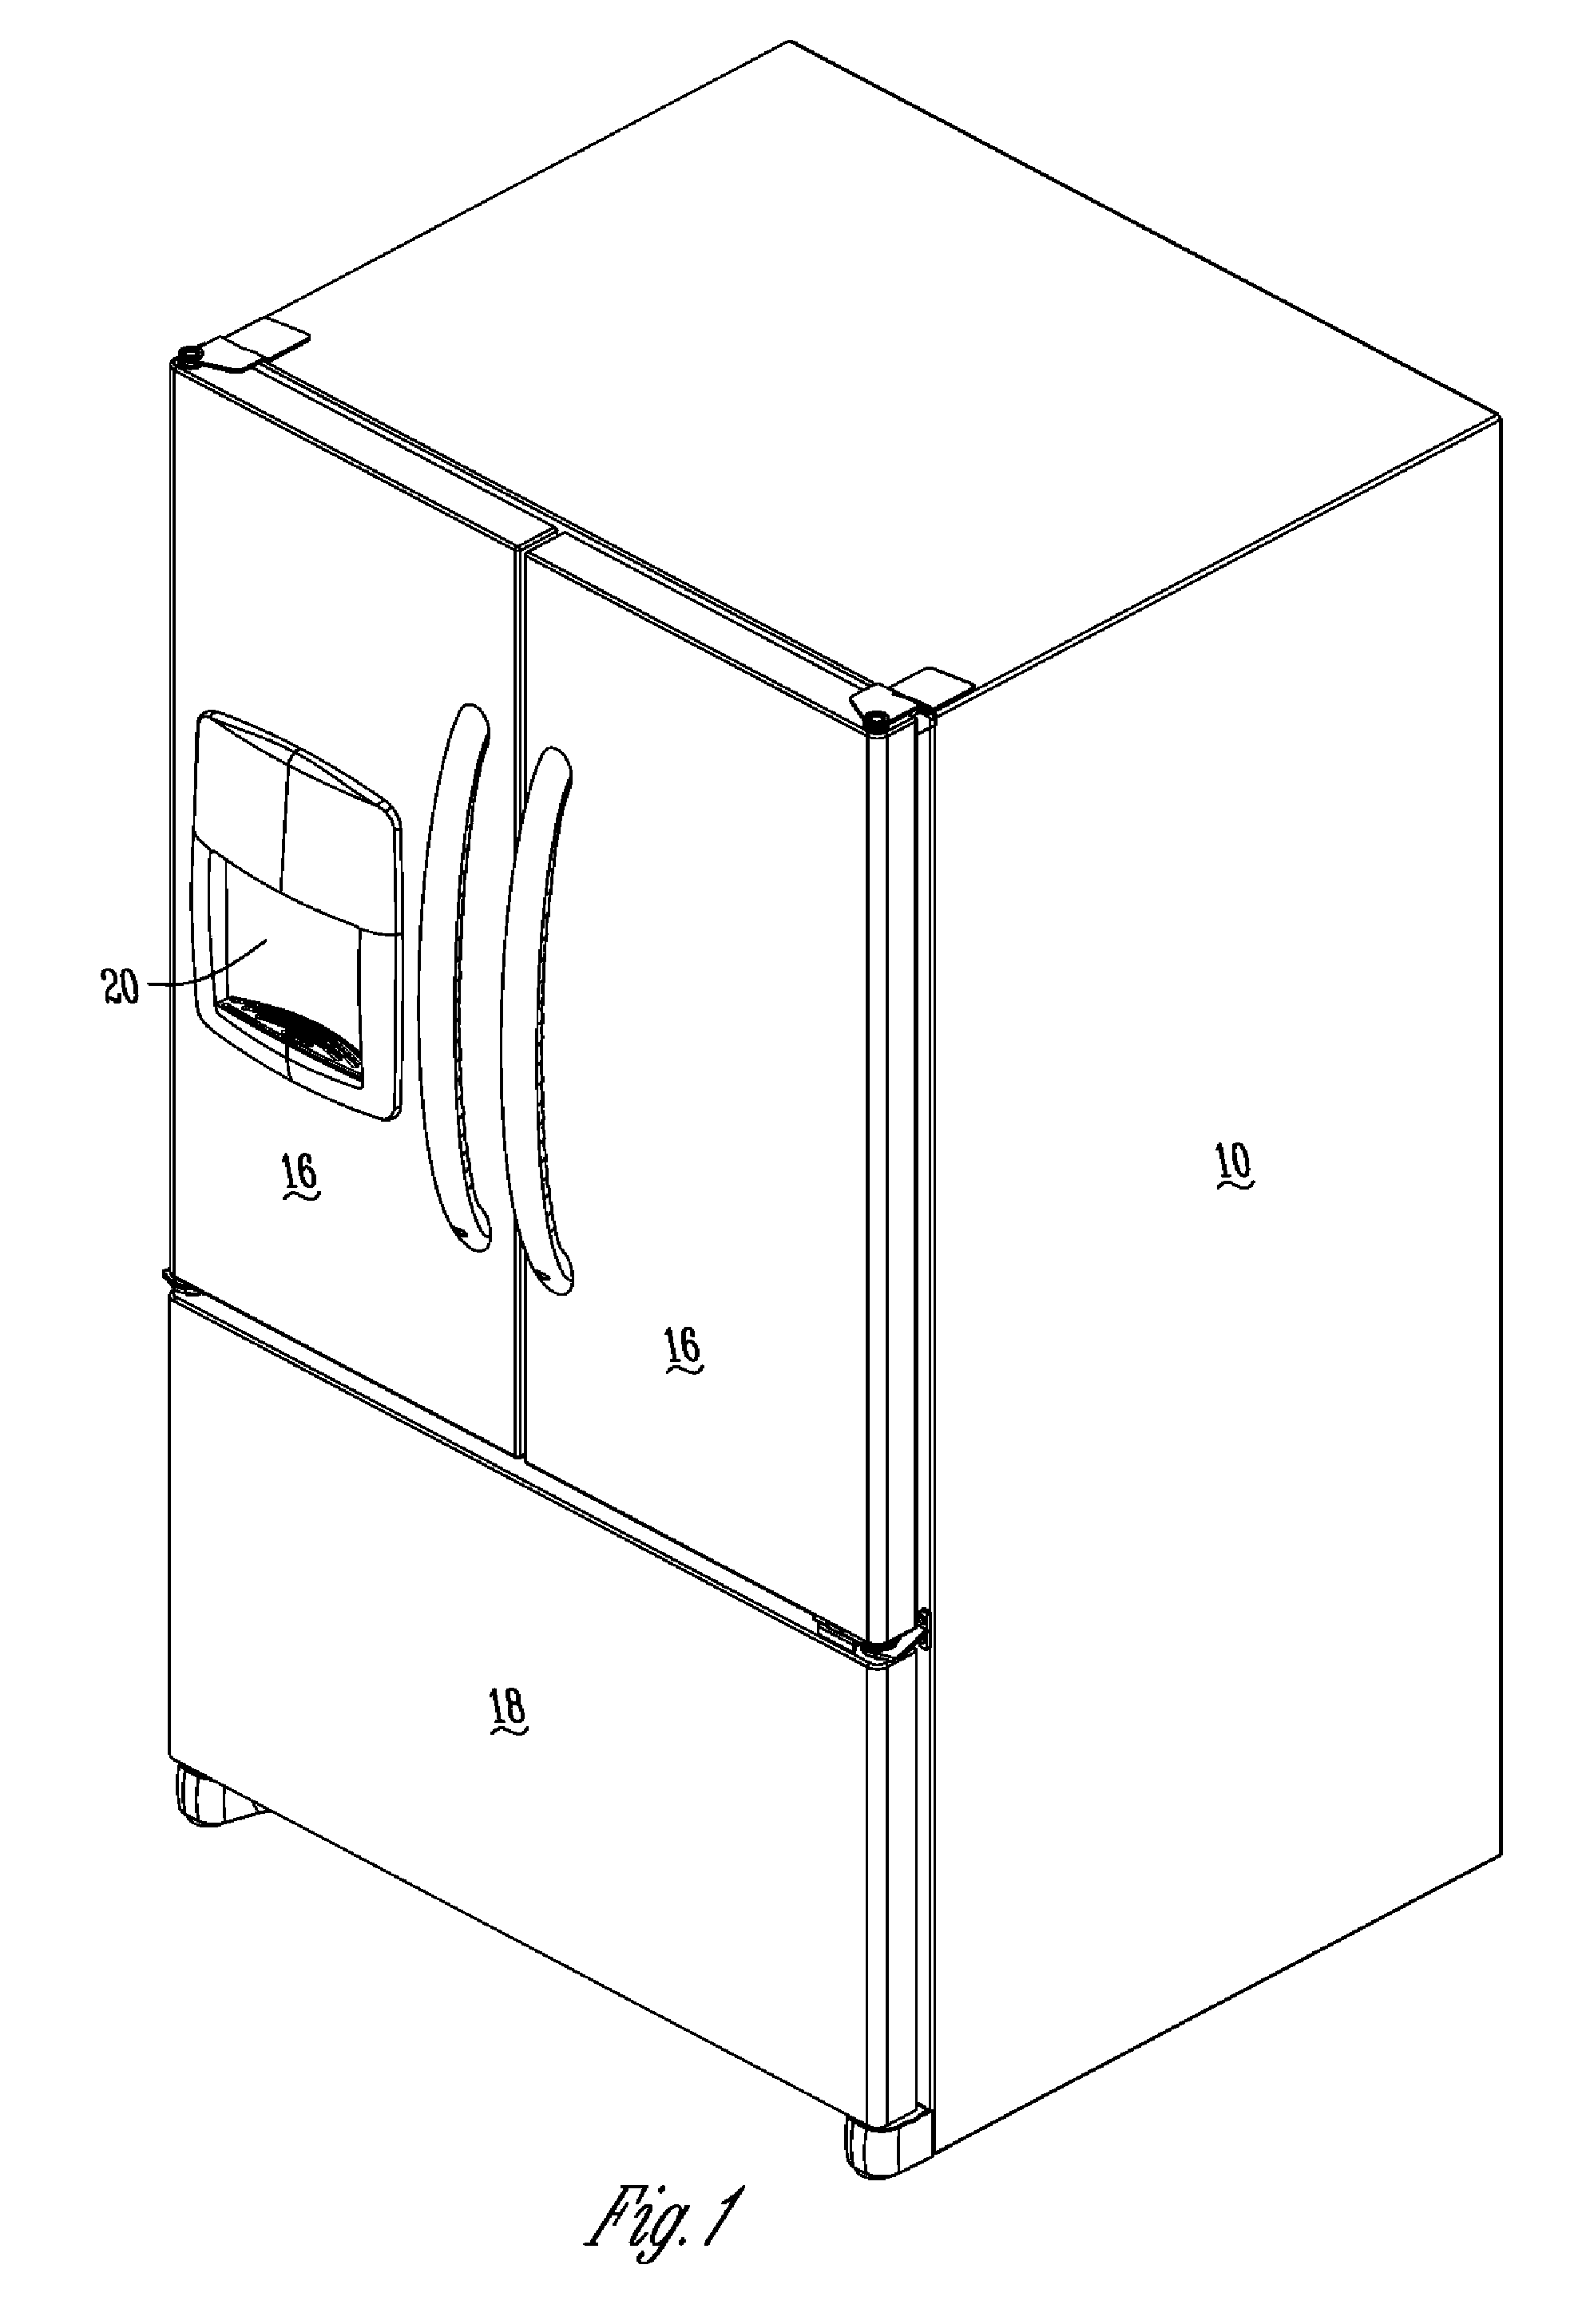 Refrigerator with easy access drawer